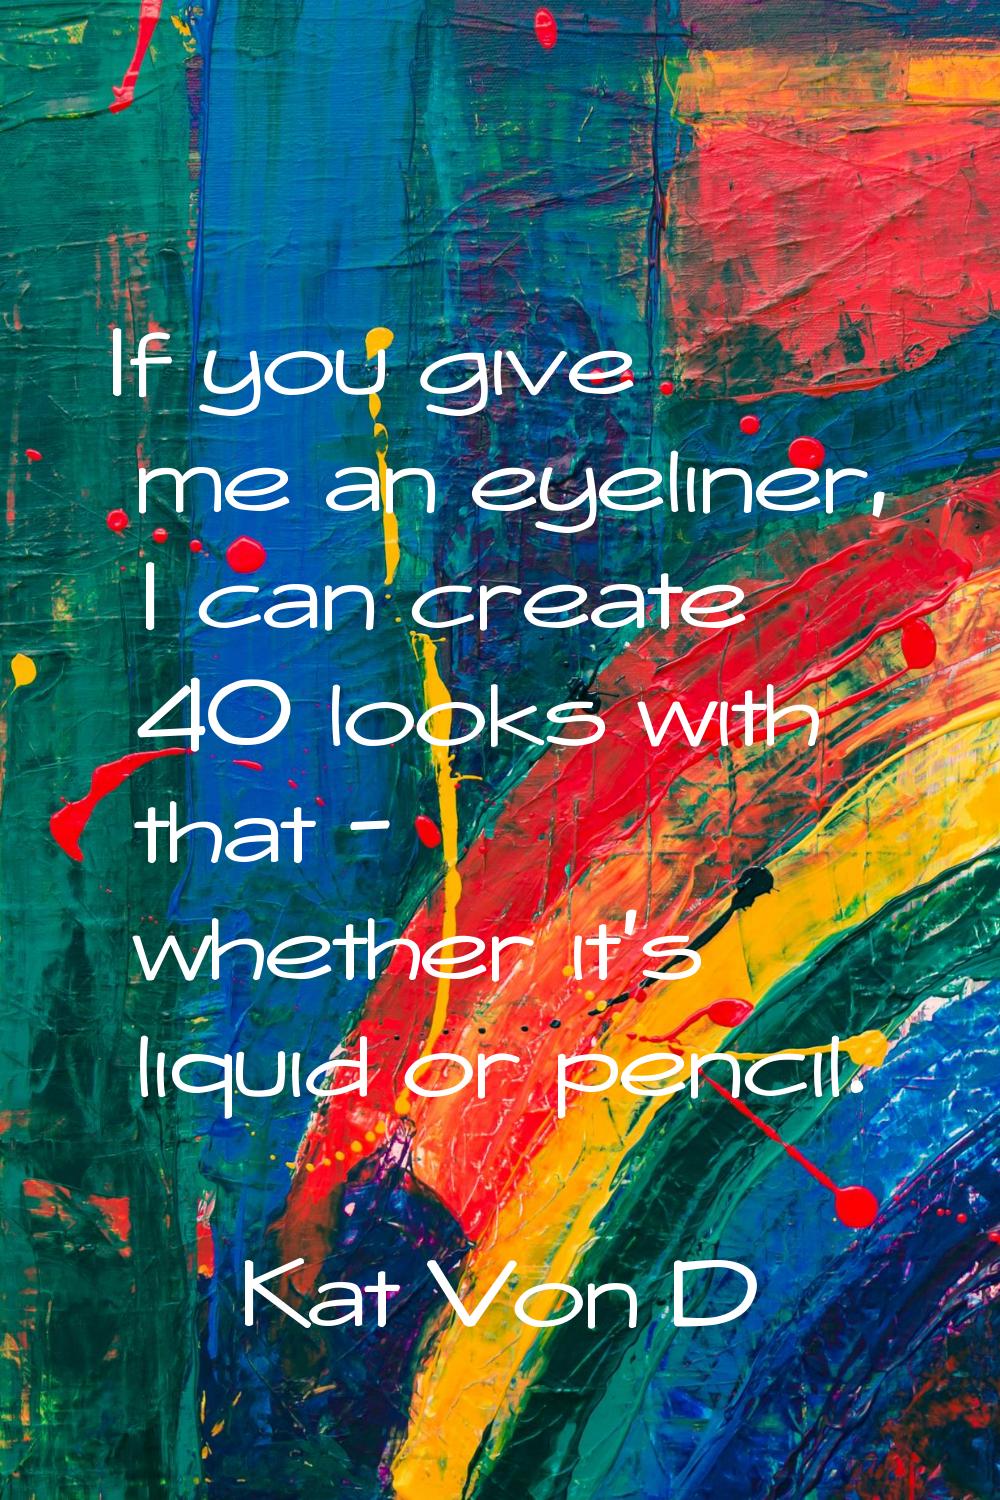 If you give me an eyeliner, I can create 40 looks with that - whether it's liquid or pencil.